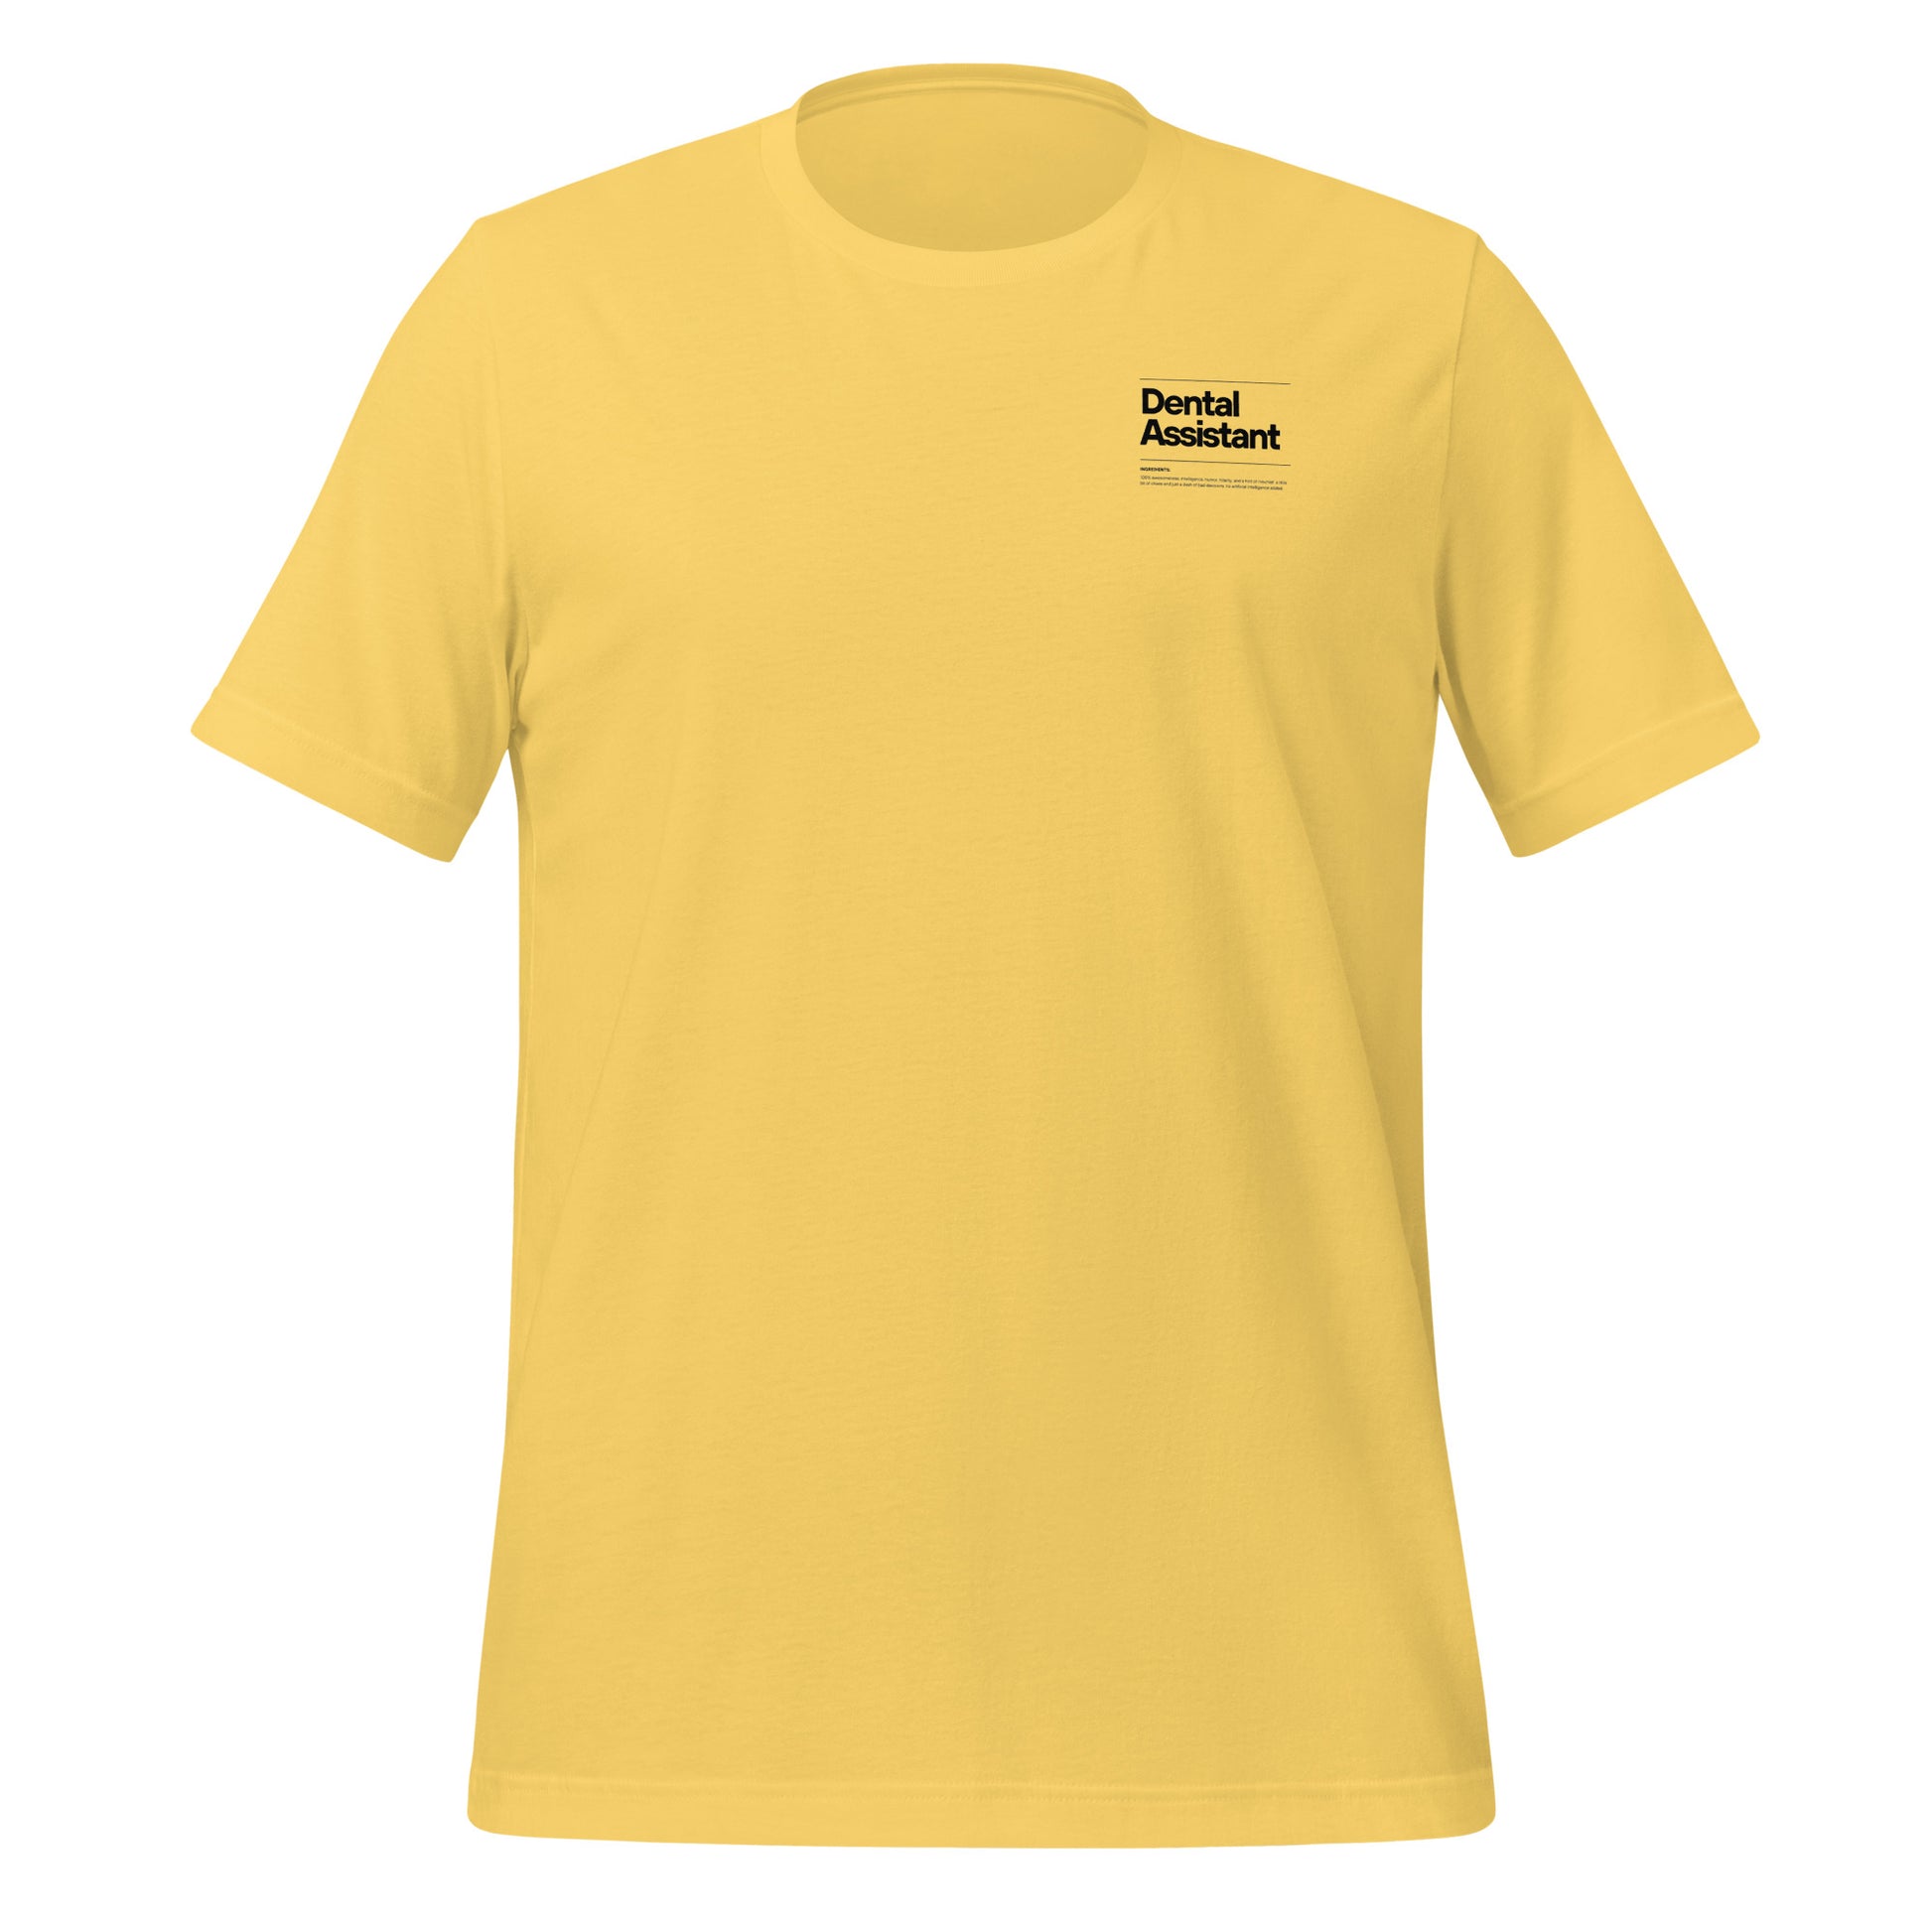 Yellow dental assistant shirt featuring a creative label design with icons and text, perfect for dental assistants who want to express their identity and passion for their job - dental shirts front view.